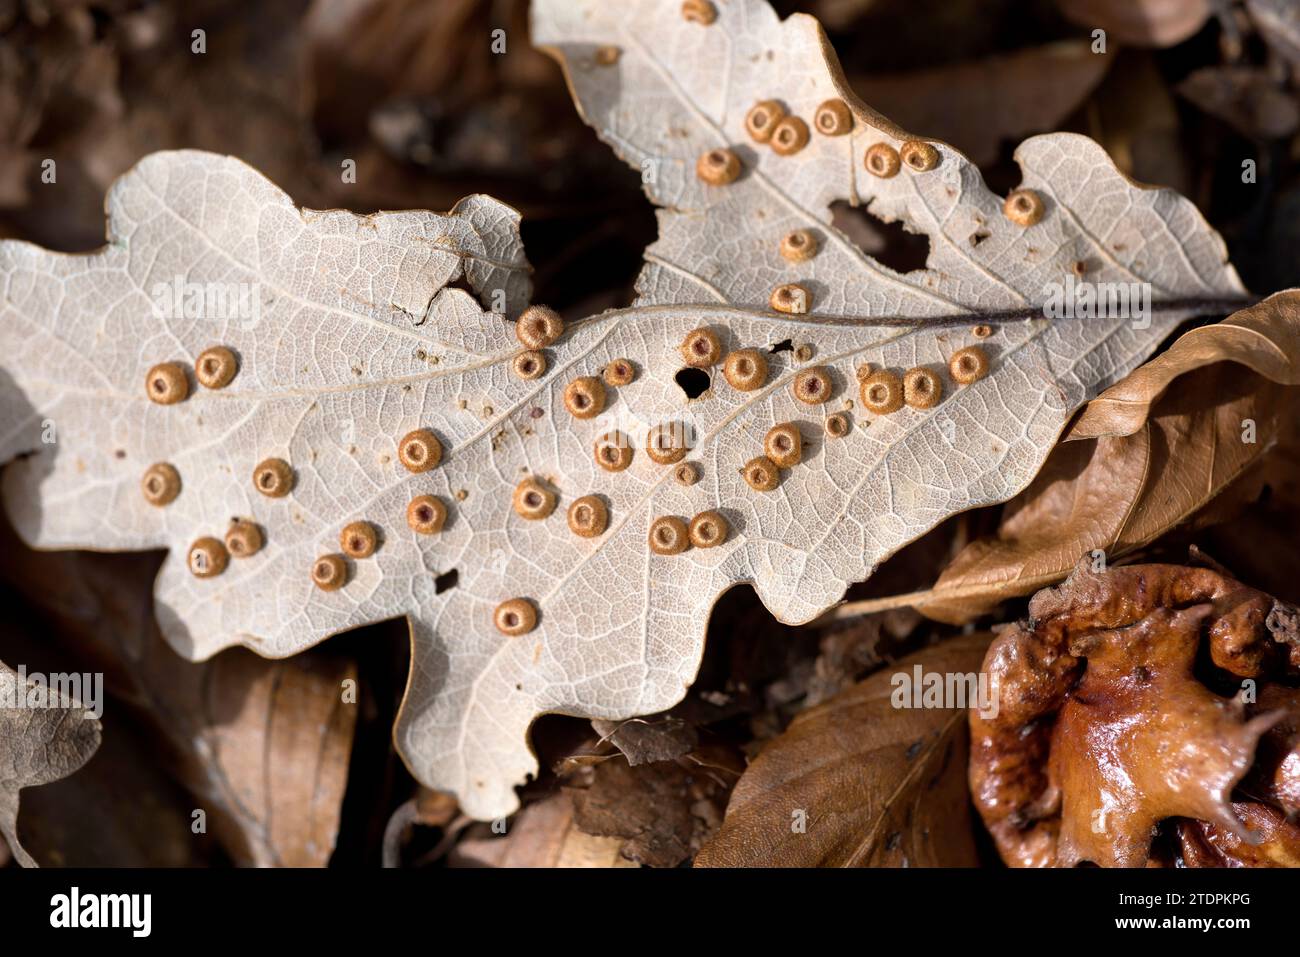 Common spangle gall produced by cynipid wasp Neuroterus quercusbaccarum on oak leaves. This photo was taken in Montseny Biosphere Reserve, Barcelona p Stock Photo